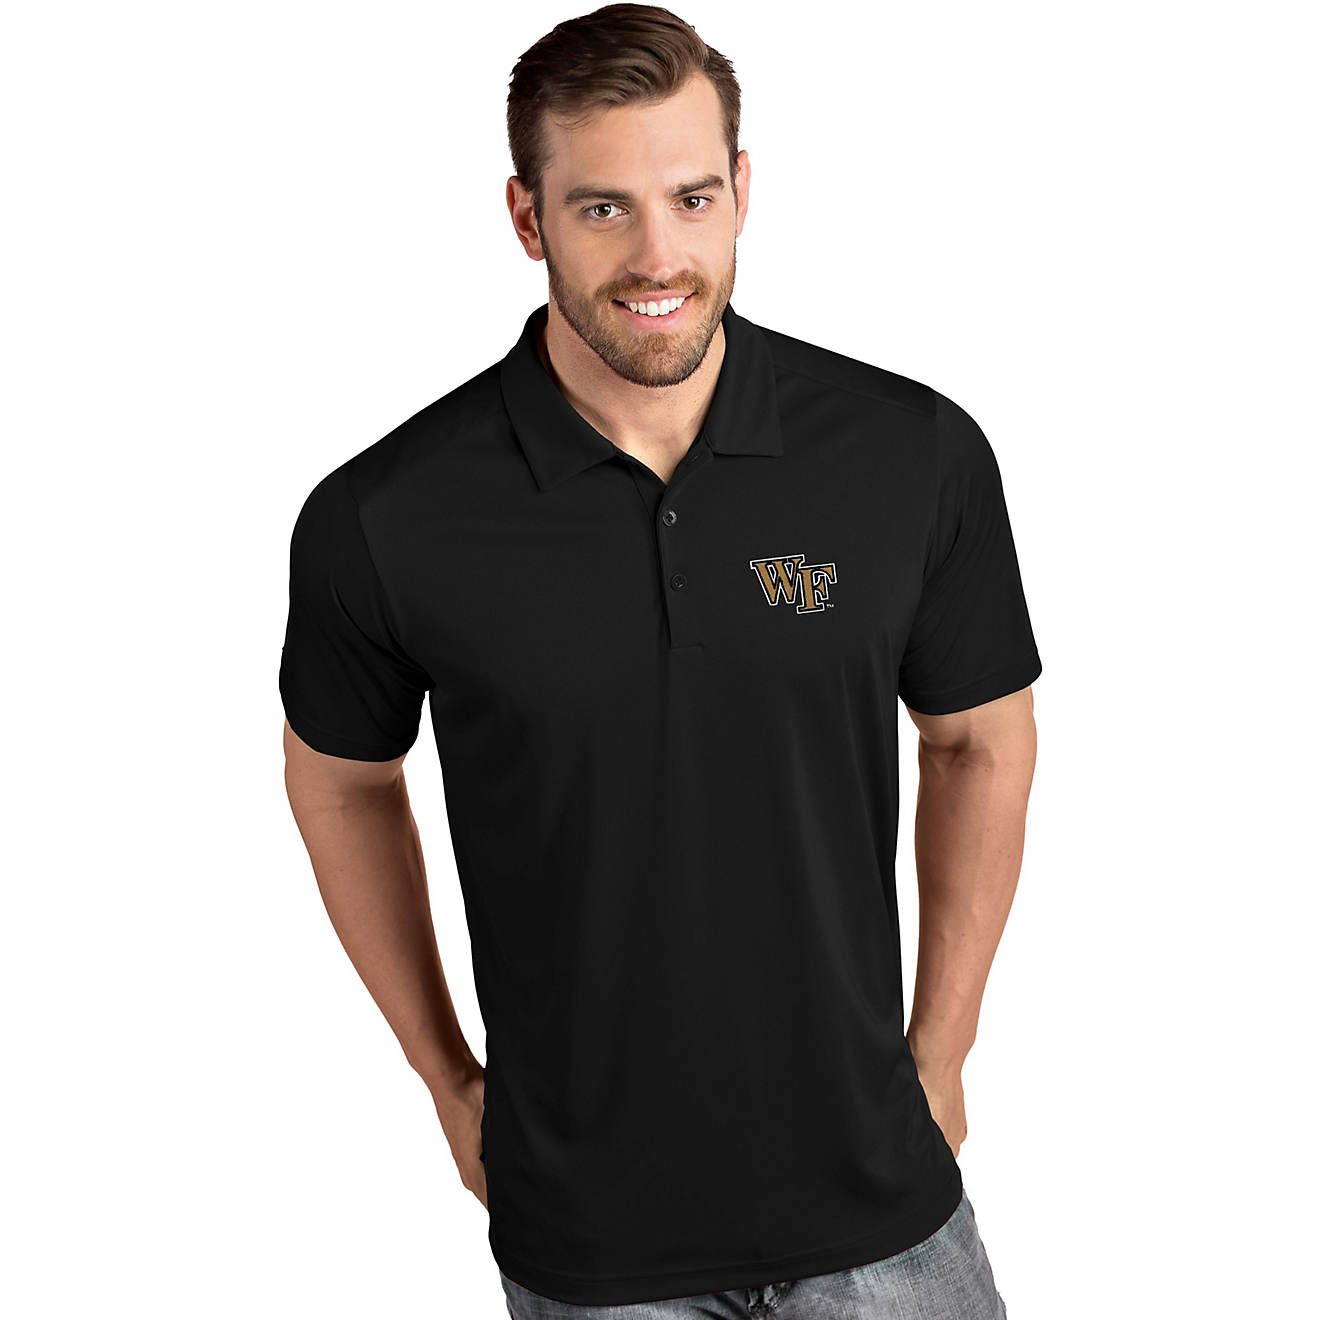 Antigua Men's Wake Forest University Tribute Polo Shirt                                                                          - view number 1